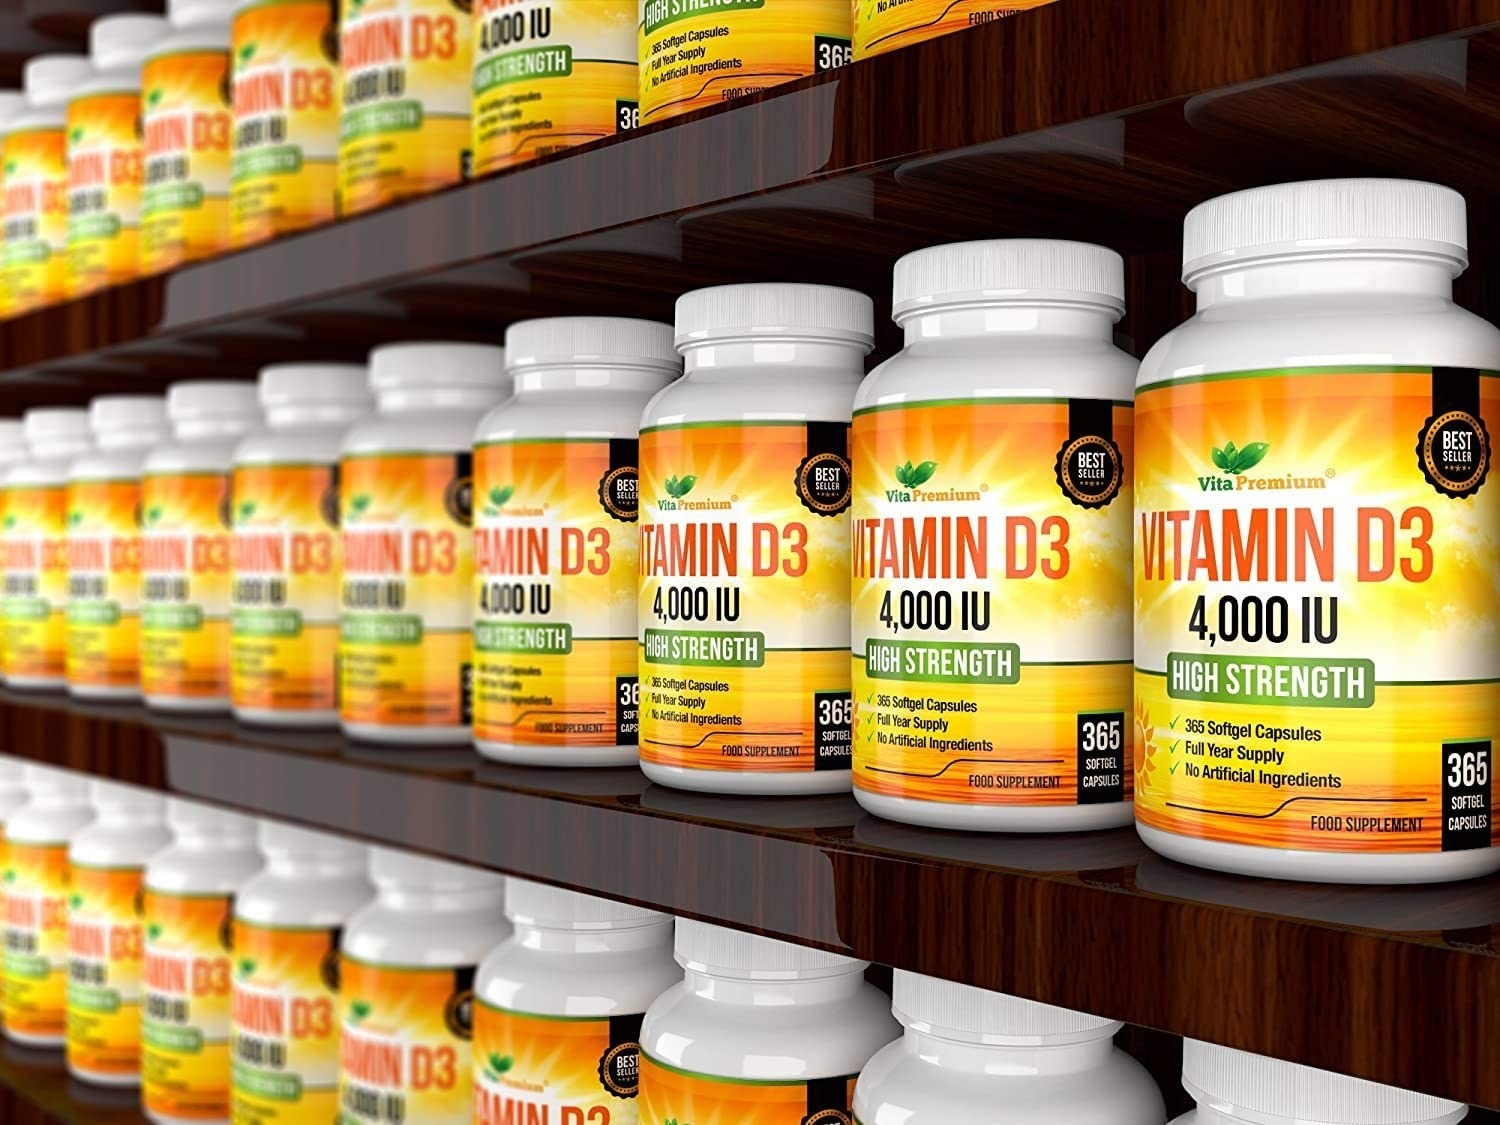 Vitamin D3 is usually provided by the sun - but in the UK